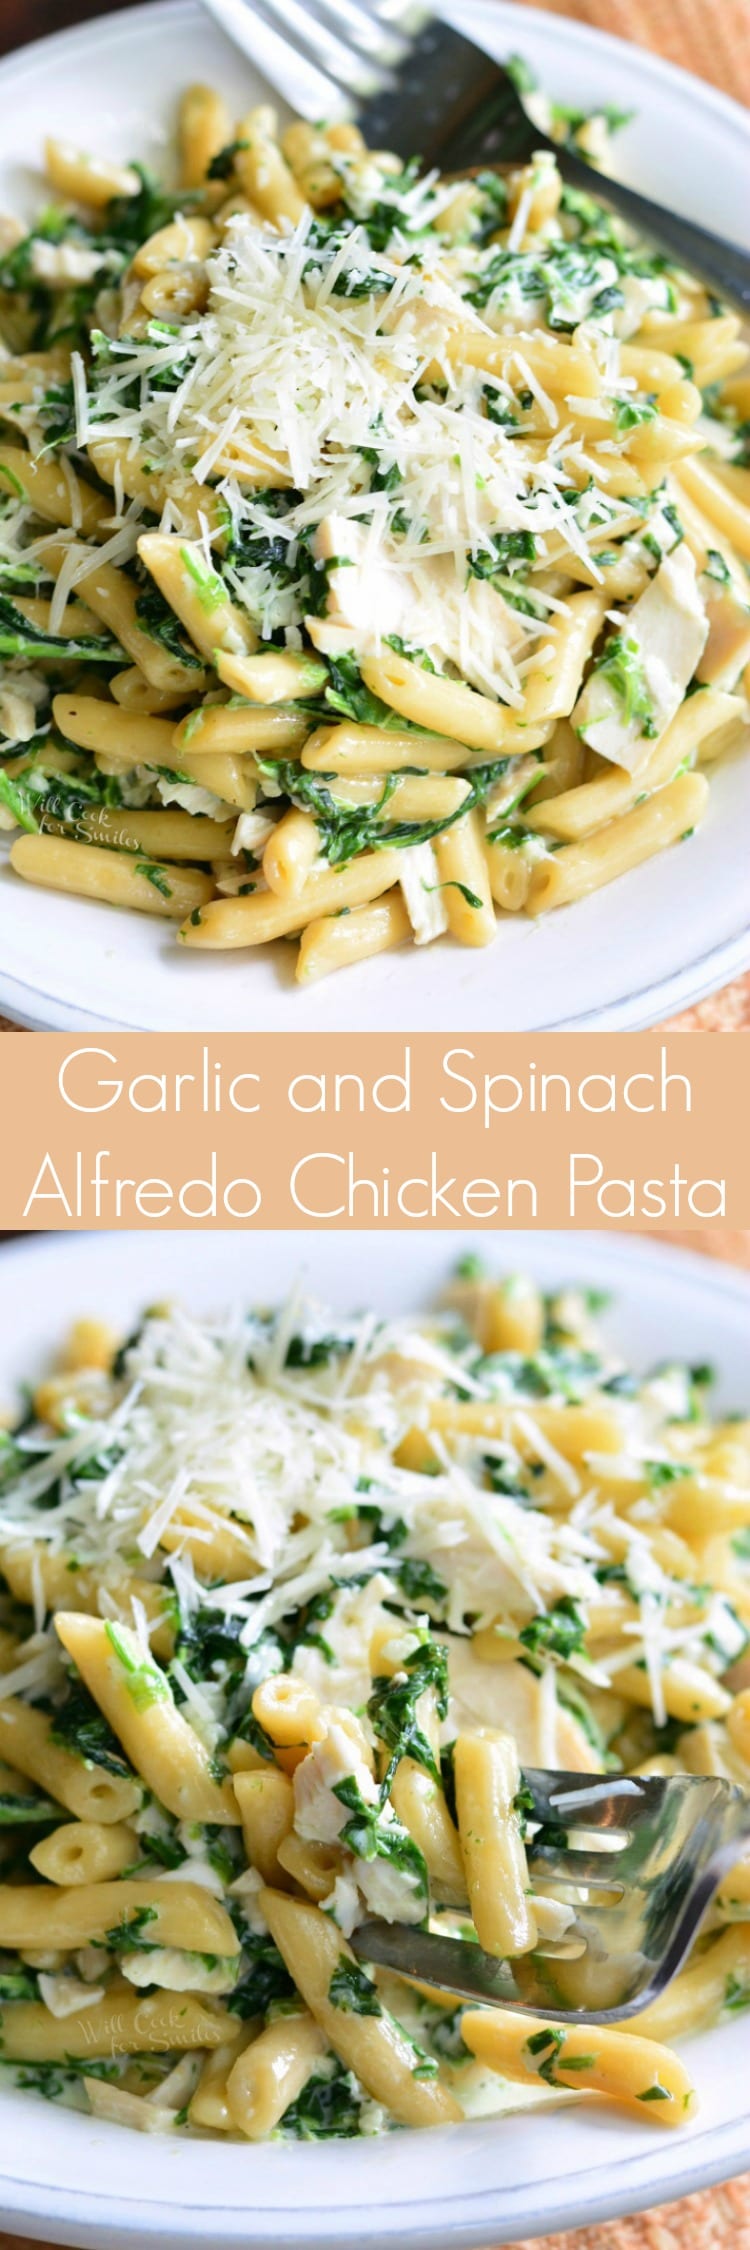 collage of Garlic and Spinach Alfredo Chicken Pasta in a bowl 